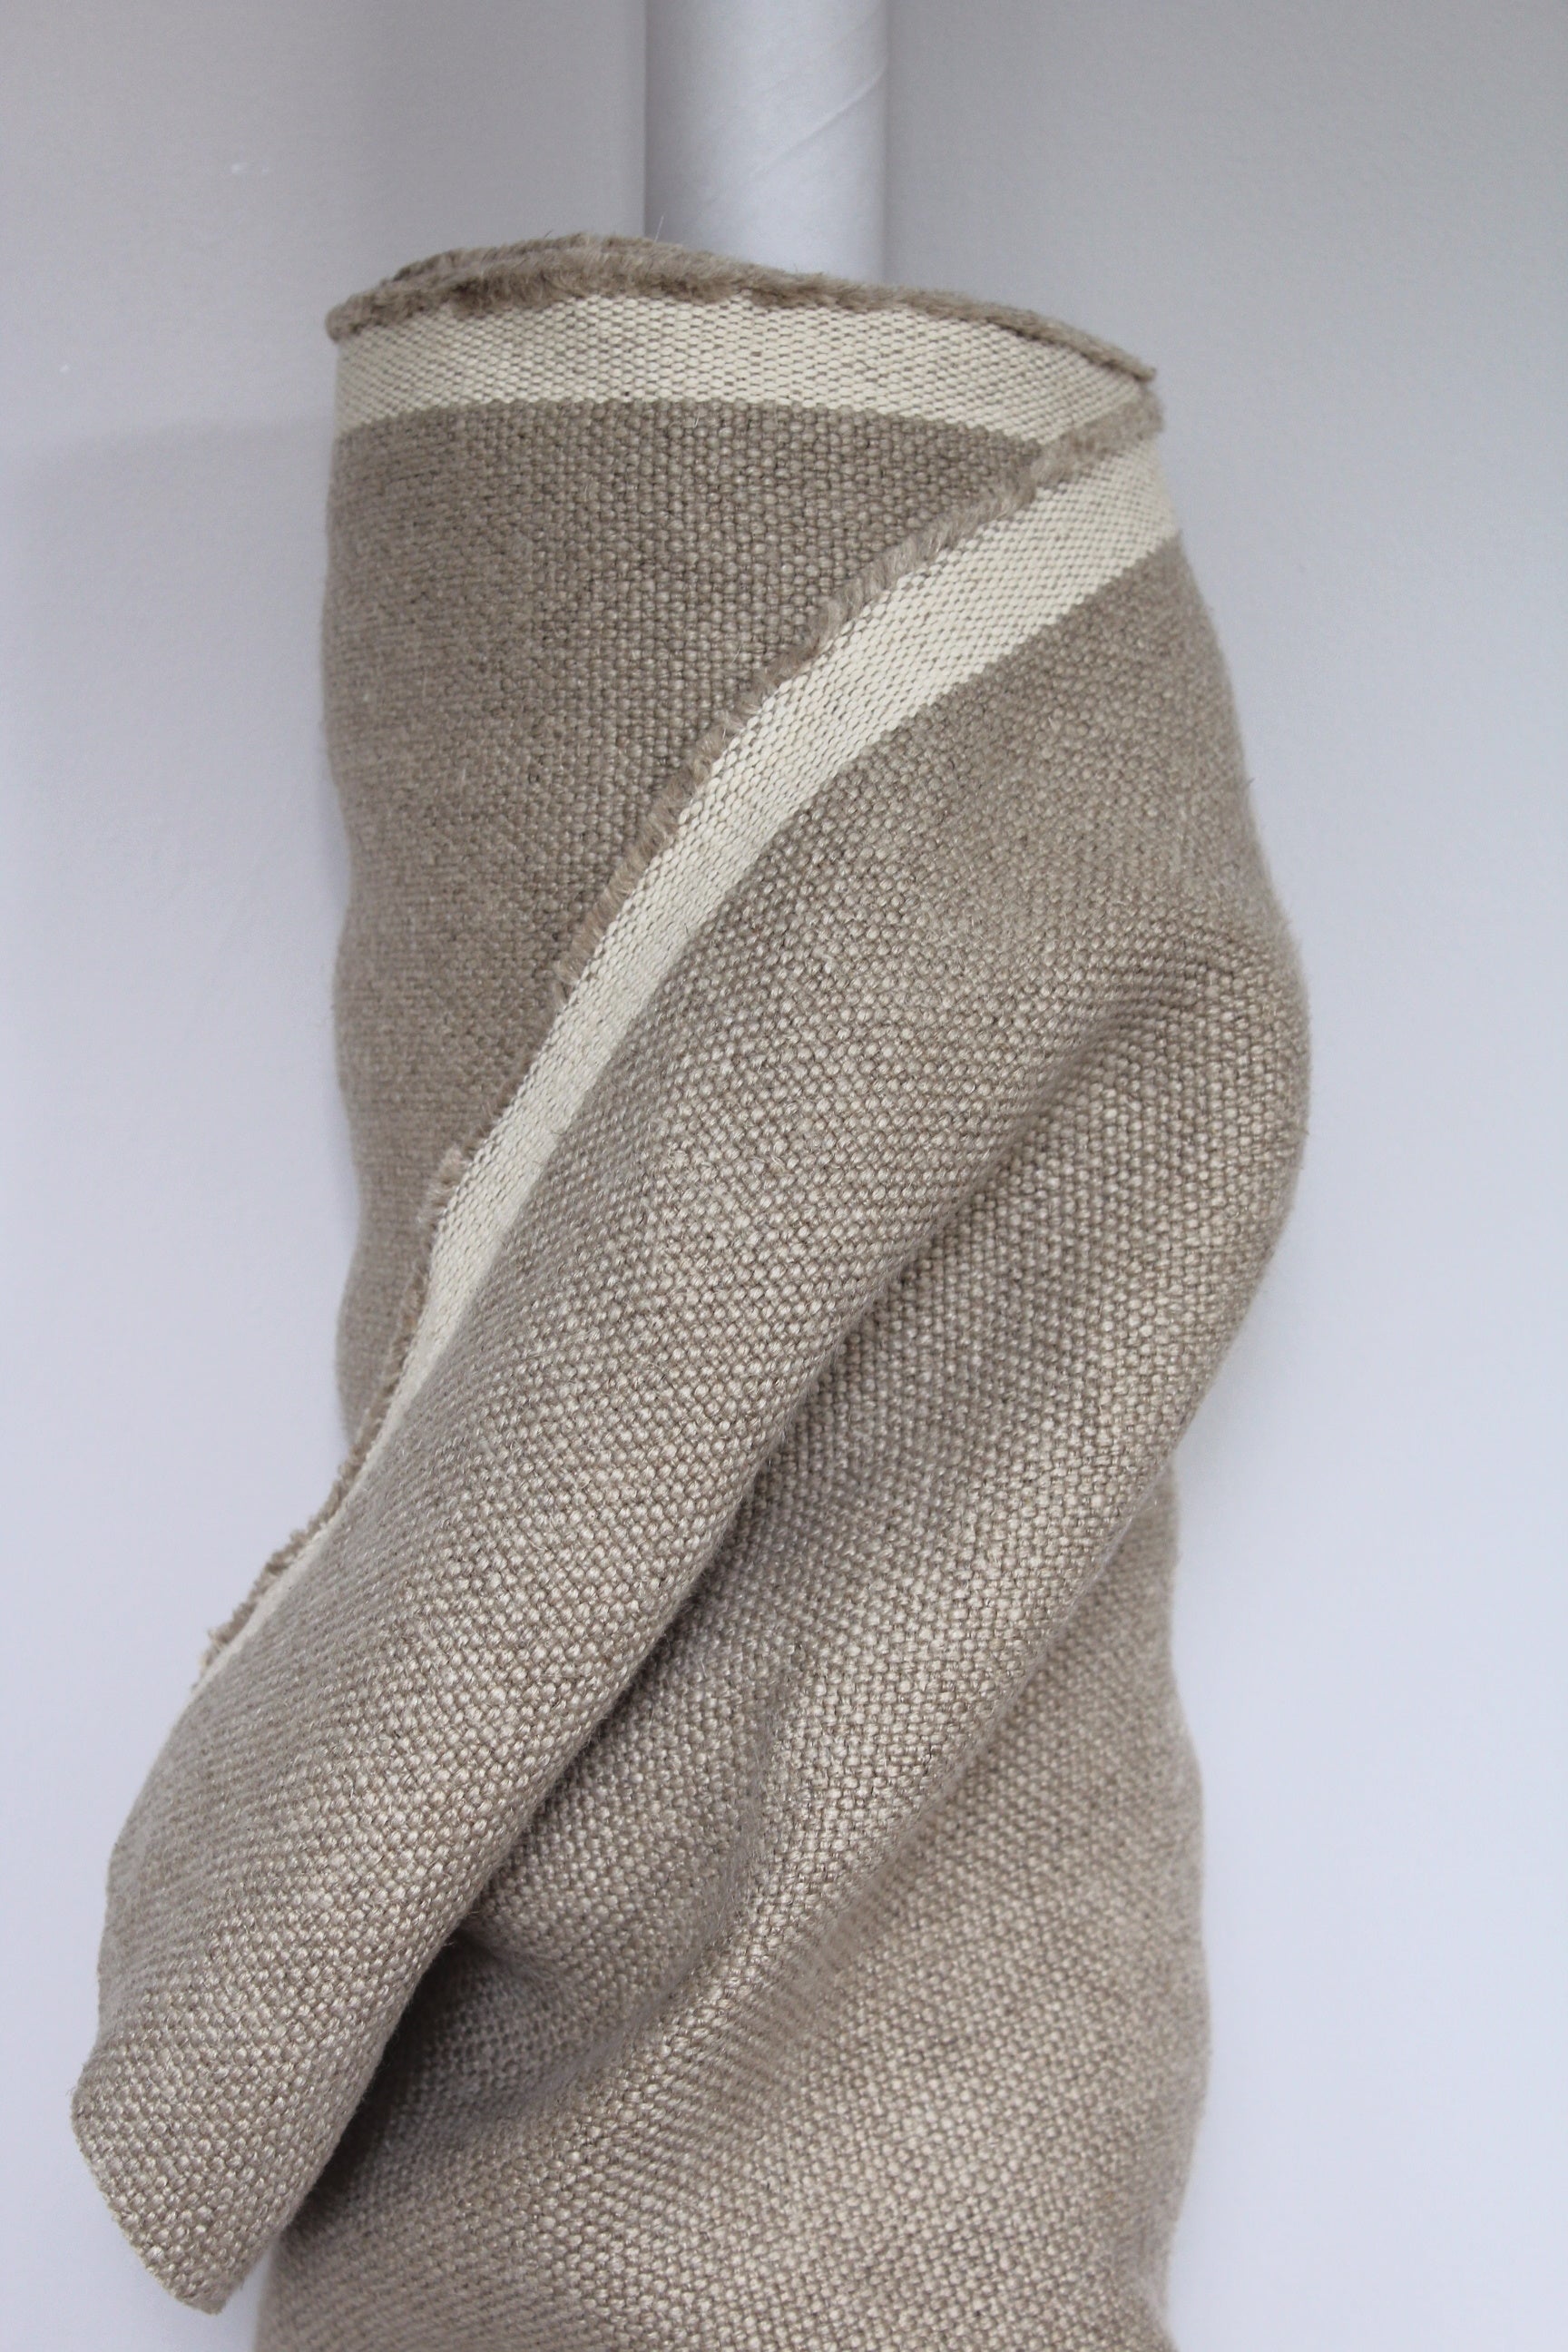 pure natural flax linen sand beige heavily woven texture heavy weight fabric